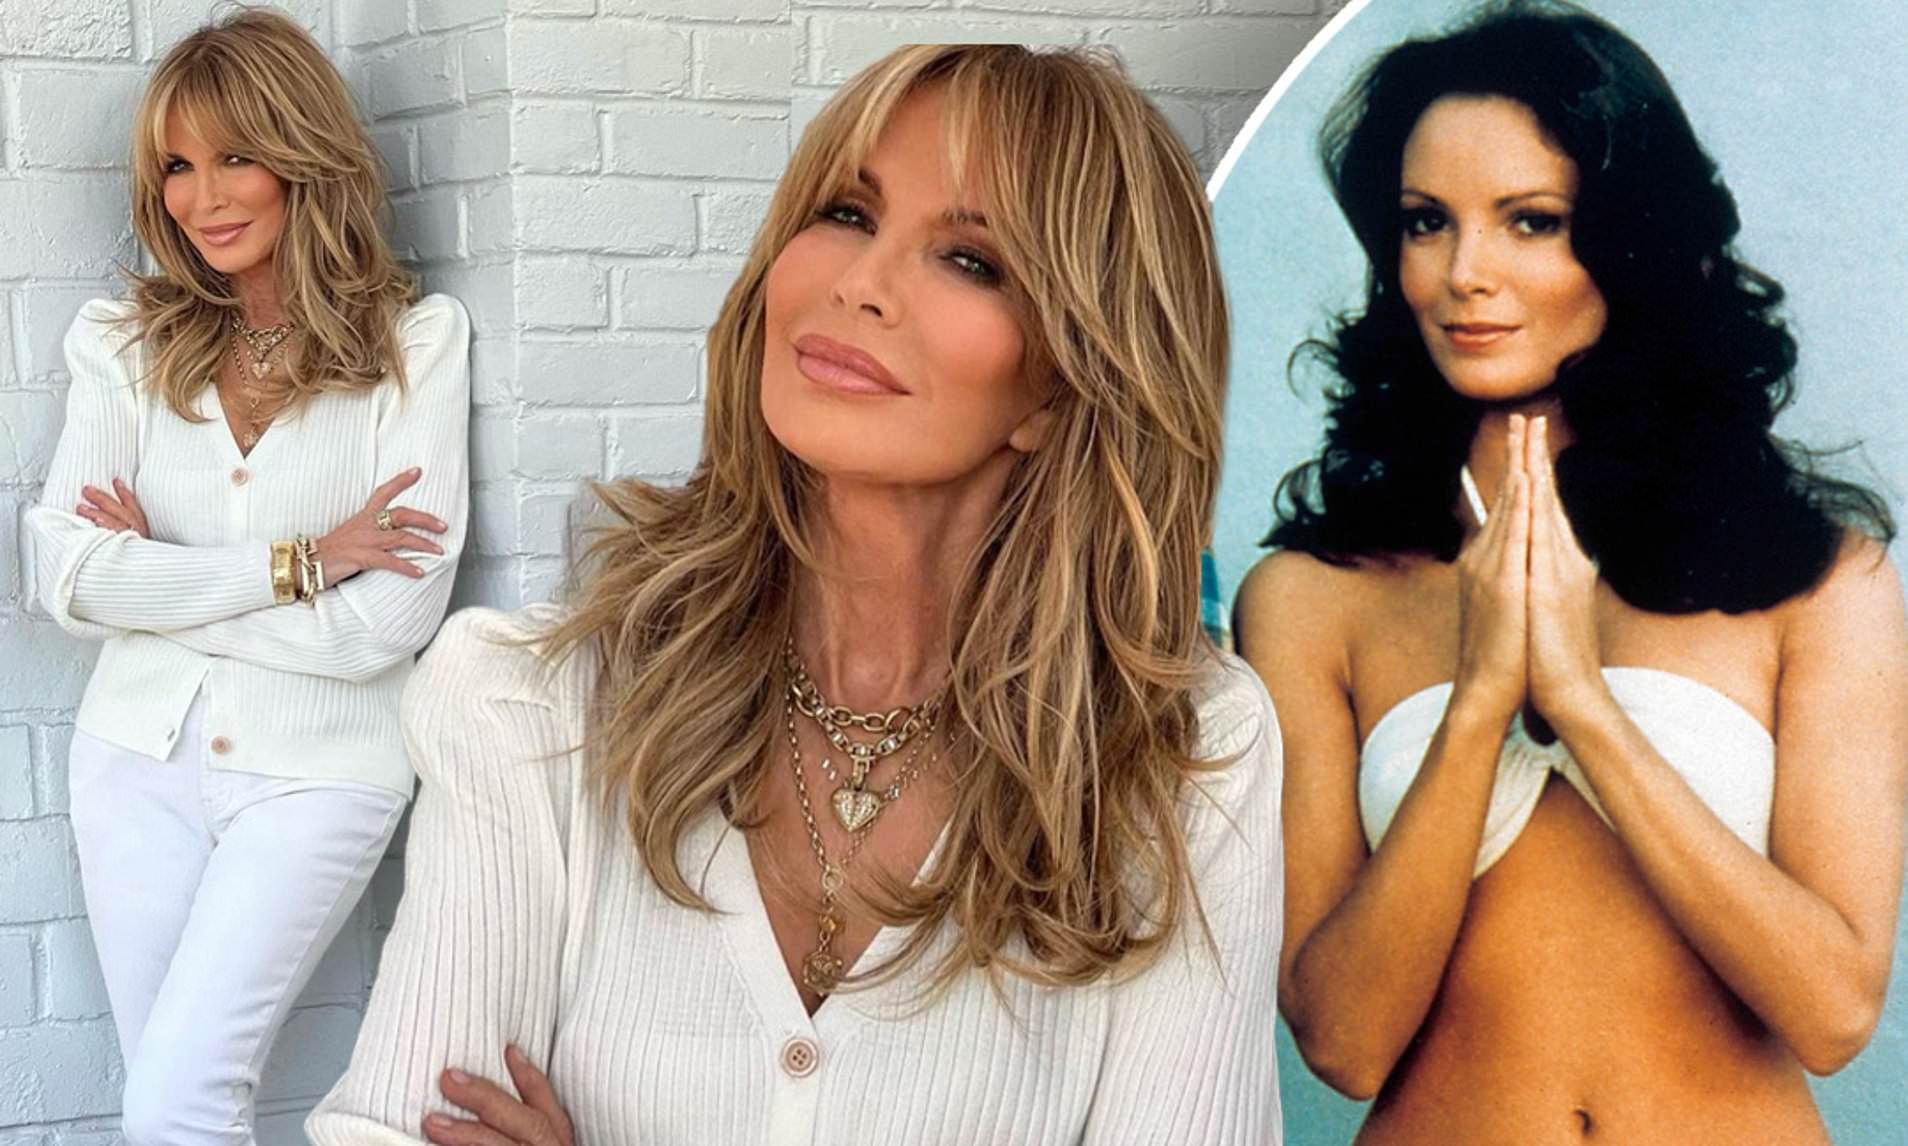 Veteran of Charlie’s Angels Jaclyn Smith, 77, poses in a winter white dress she created for Nordstrom Rack and appears as youthful as she did in her 20s